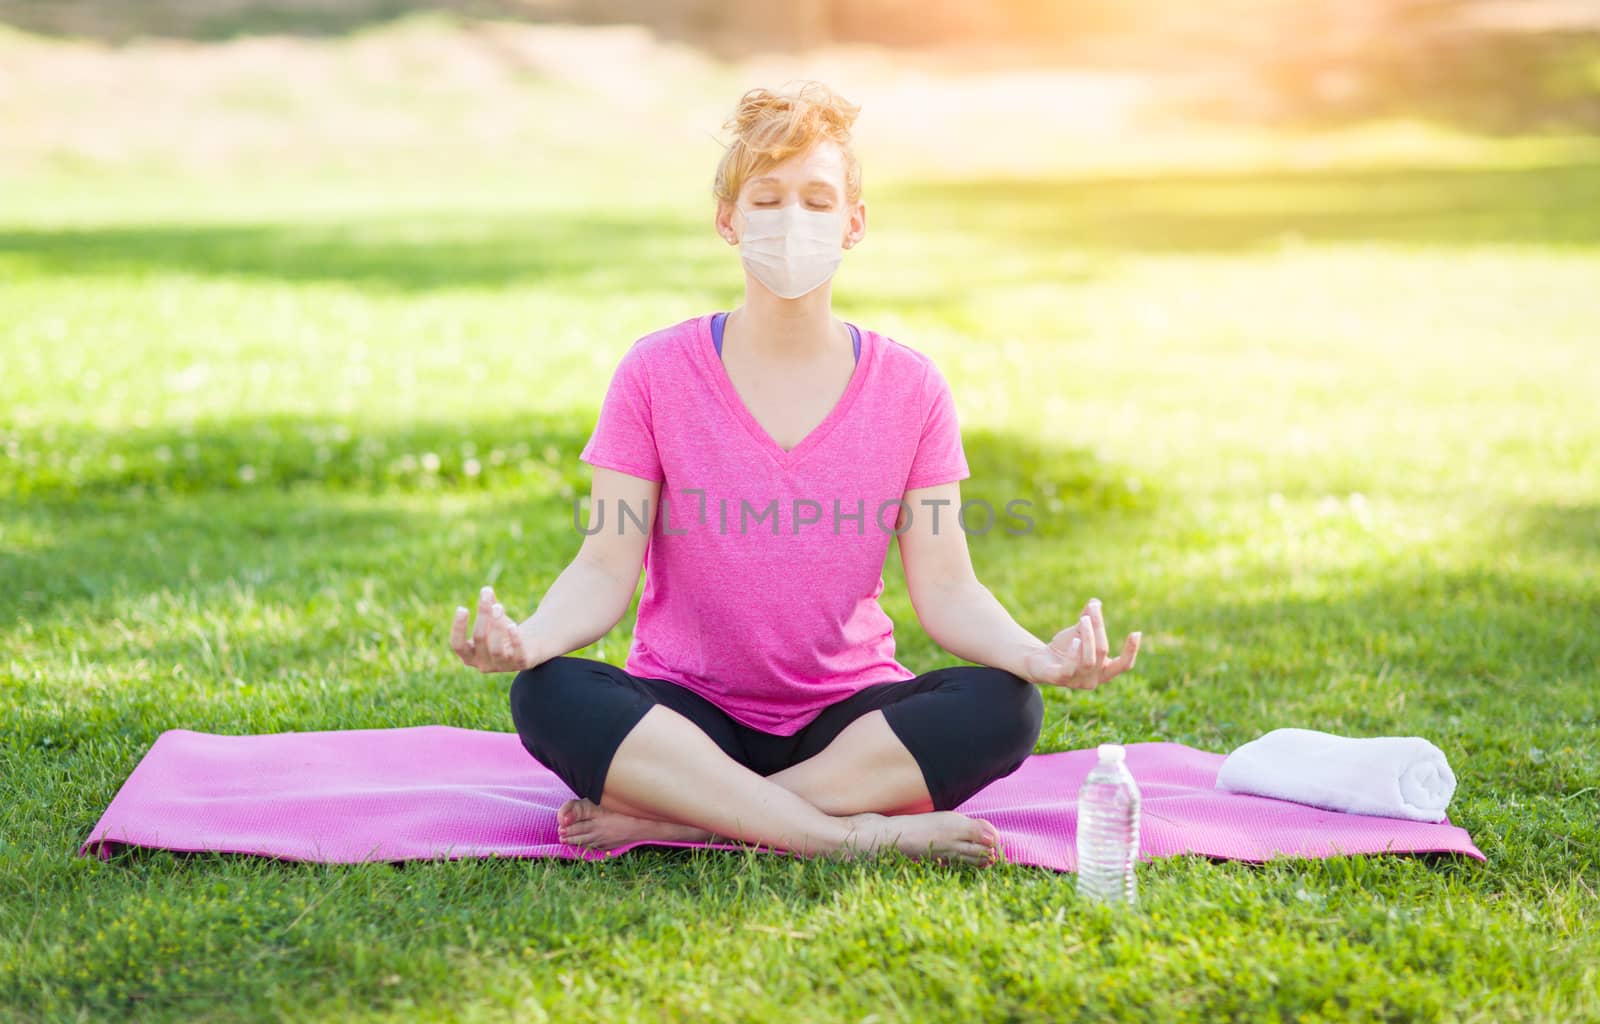 Girl Wearing Medical Face Mask During Yoga Meditation Workout Outdoors. by Feverpitched